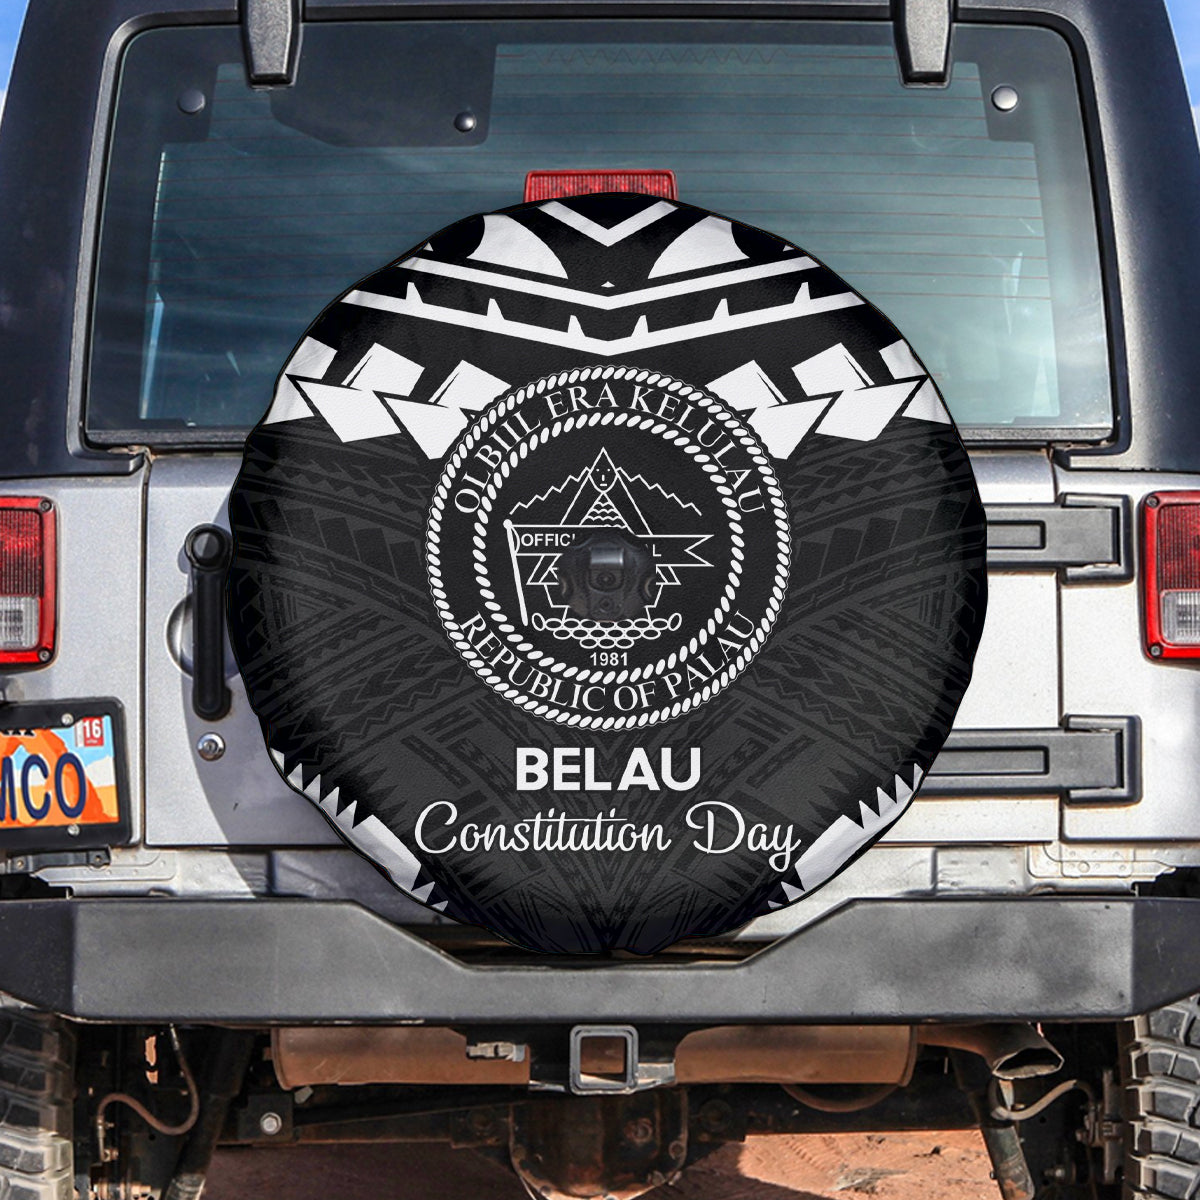 Palau Constitution Day Spare Tire Cover Belau Seal With Polynesian Pattern - Black